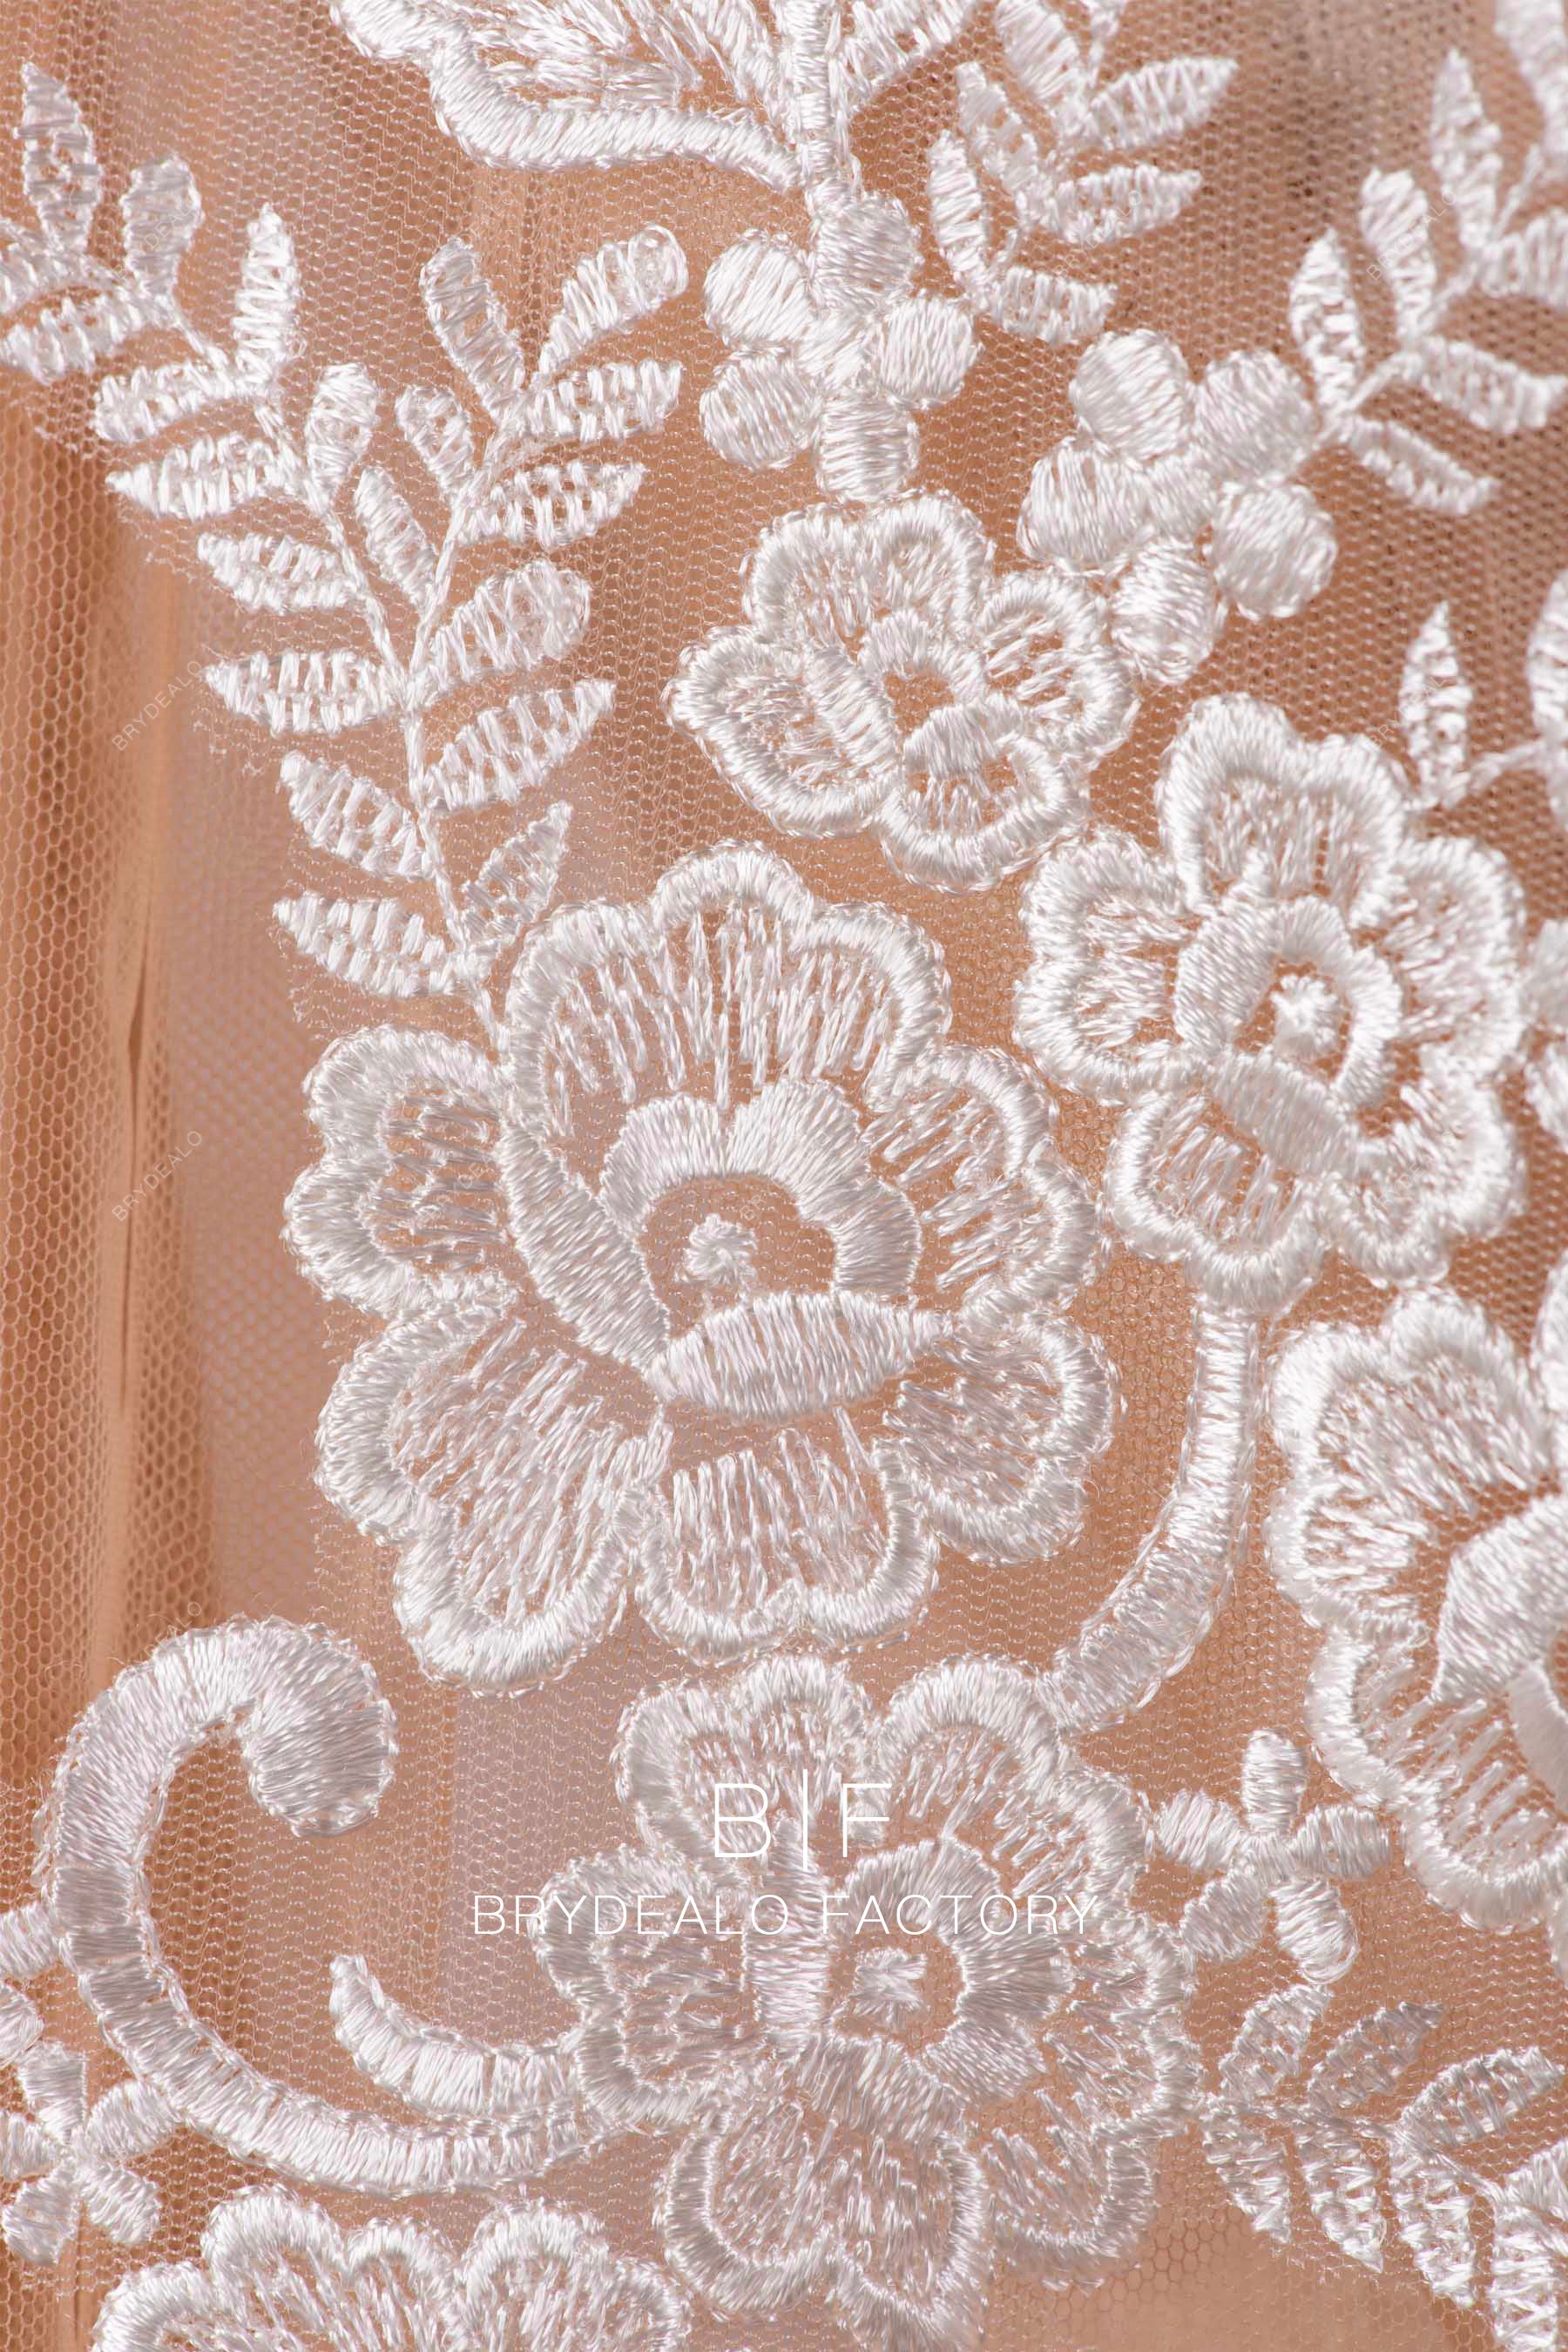 embroidery flower lace appliques